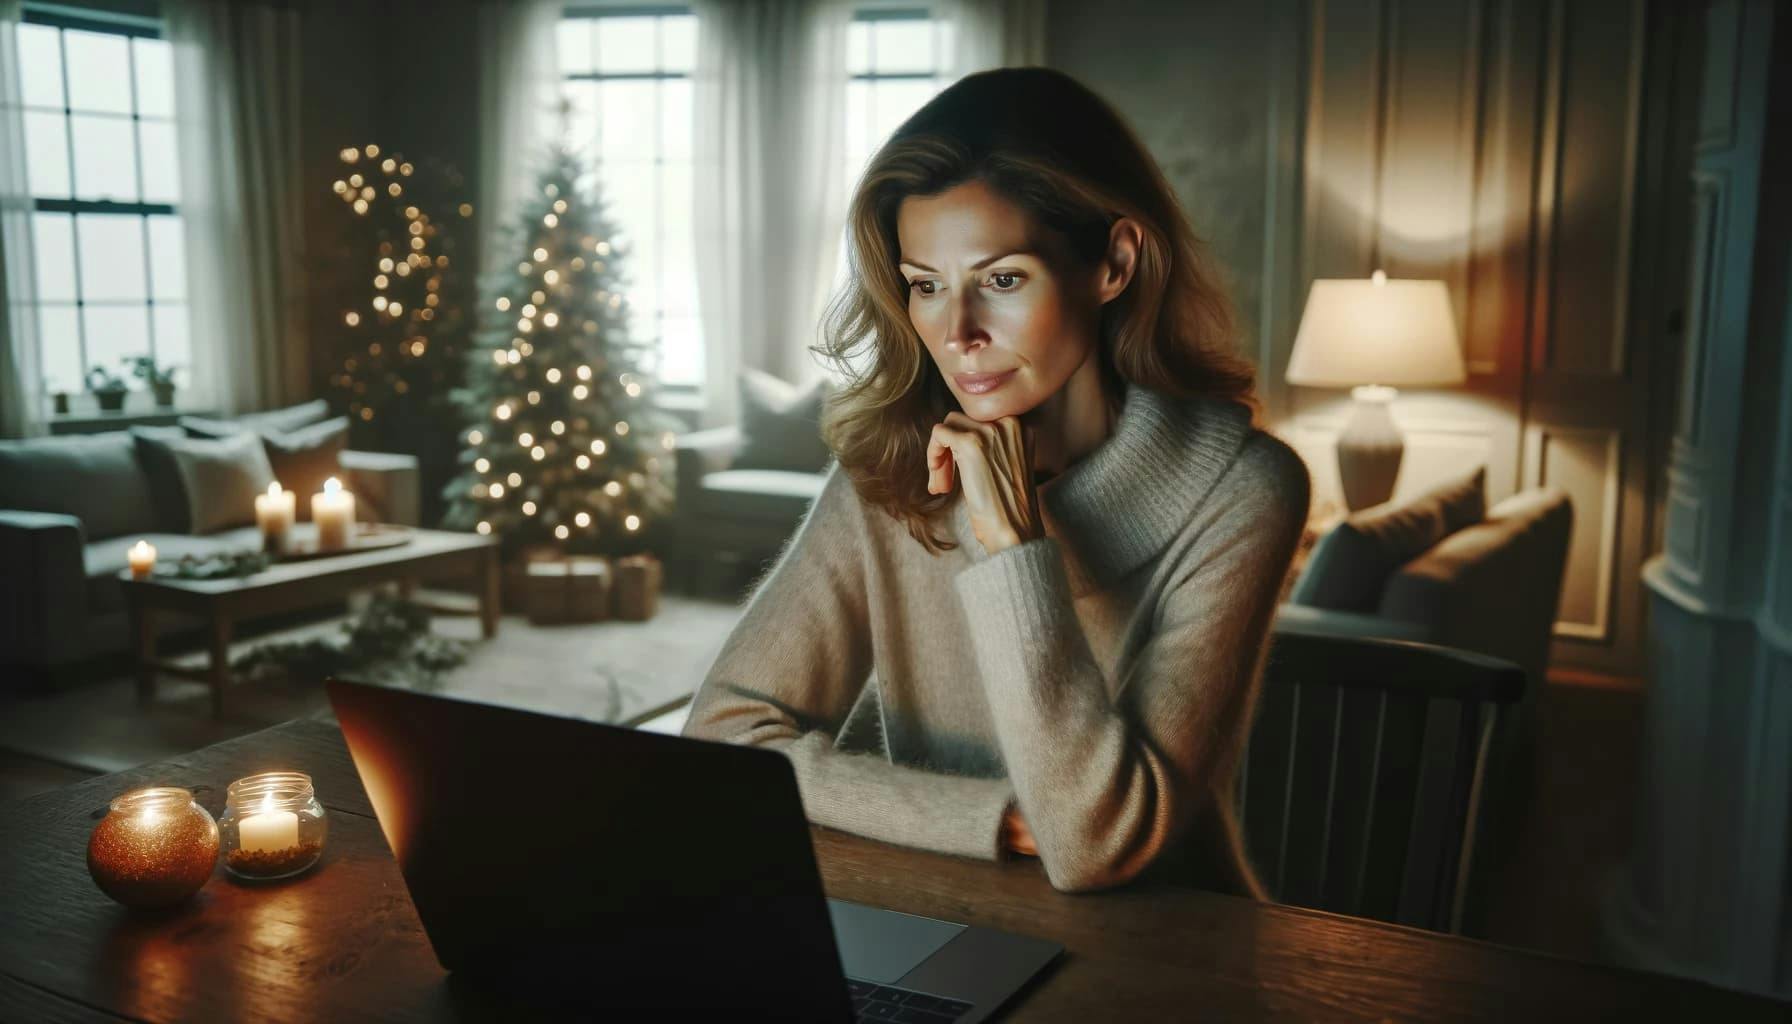 Cover Image for Your Mum Isn’t ‘Winning’ Christmas This Year, Social Data Reveals